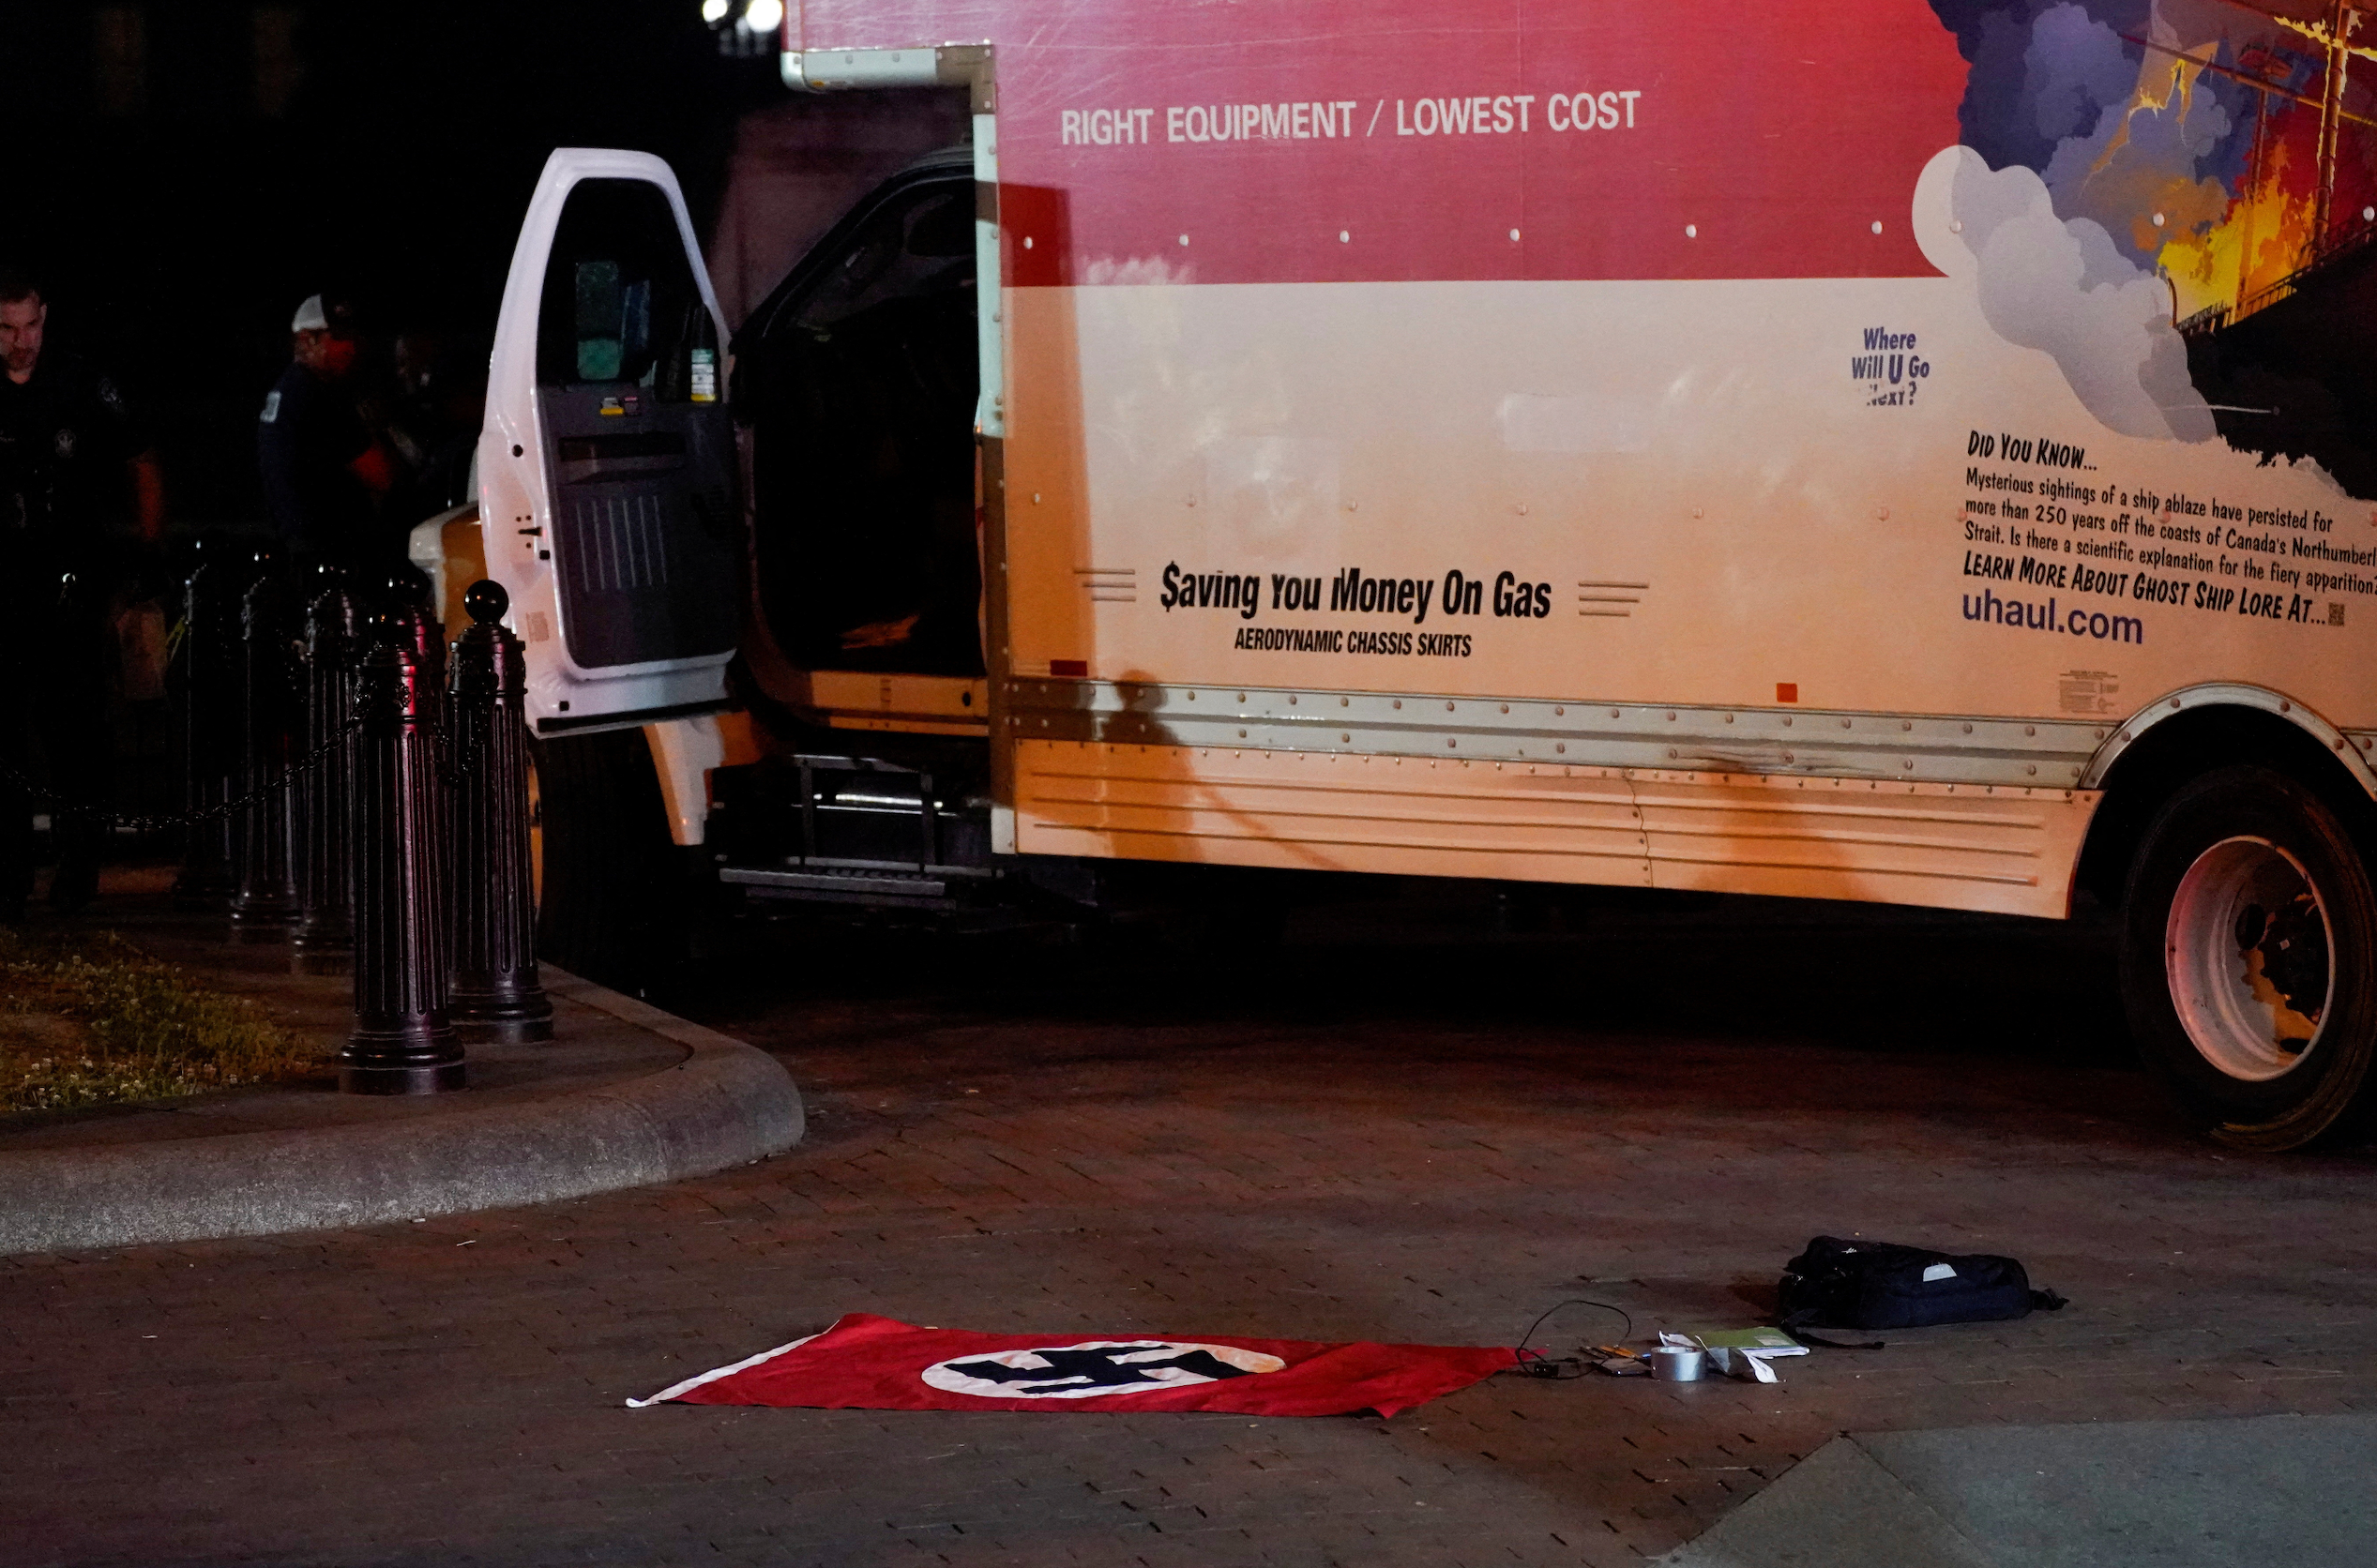 A Nazi flag and other objects recovered from a rented box truck are pictured on the ground as the U.S. Secret Service and other law enforcement agencies investigate the truck that crashed into security barriers at Lafayette Park